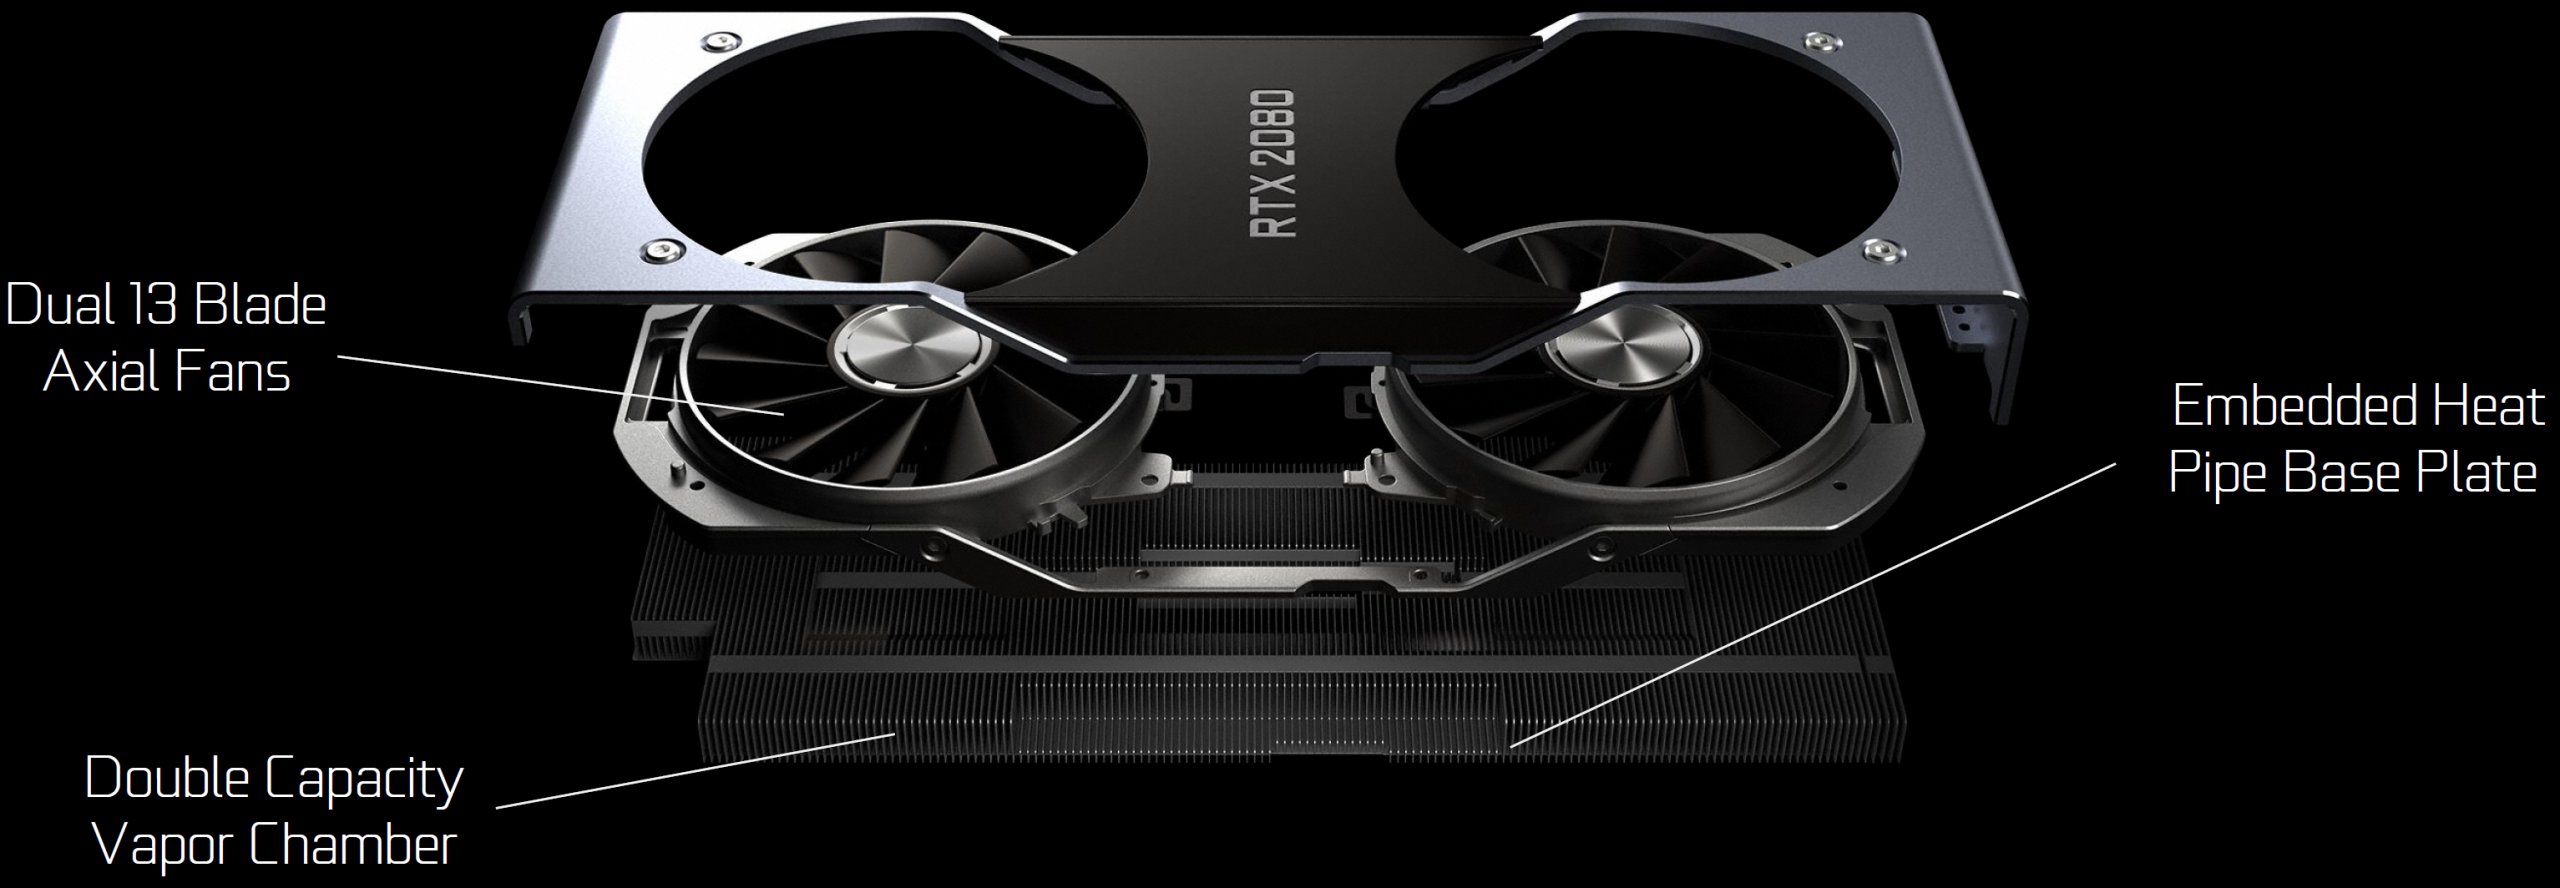 Barber besøg Blaze Nvidia GeForce RTX 2080 and RTX 2080 Ti in review - Gaming, Turing  benchmarks and new insights | Page 22 | igor'sLAB